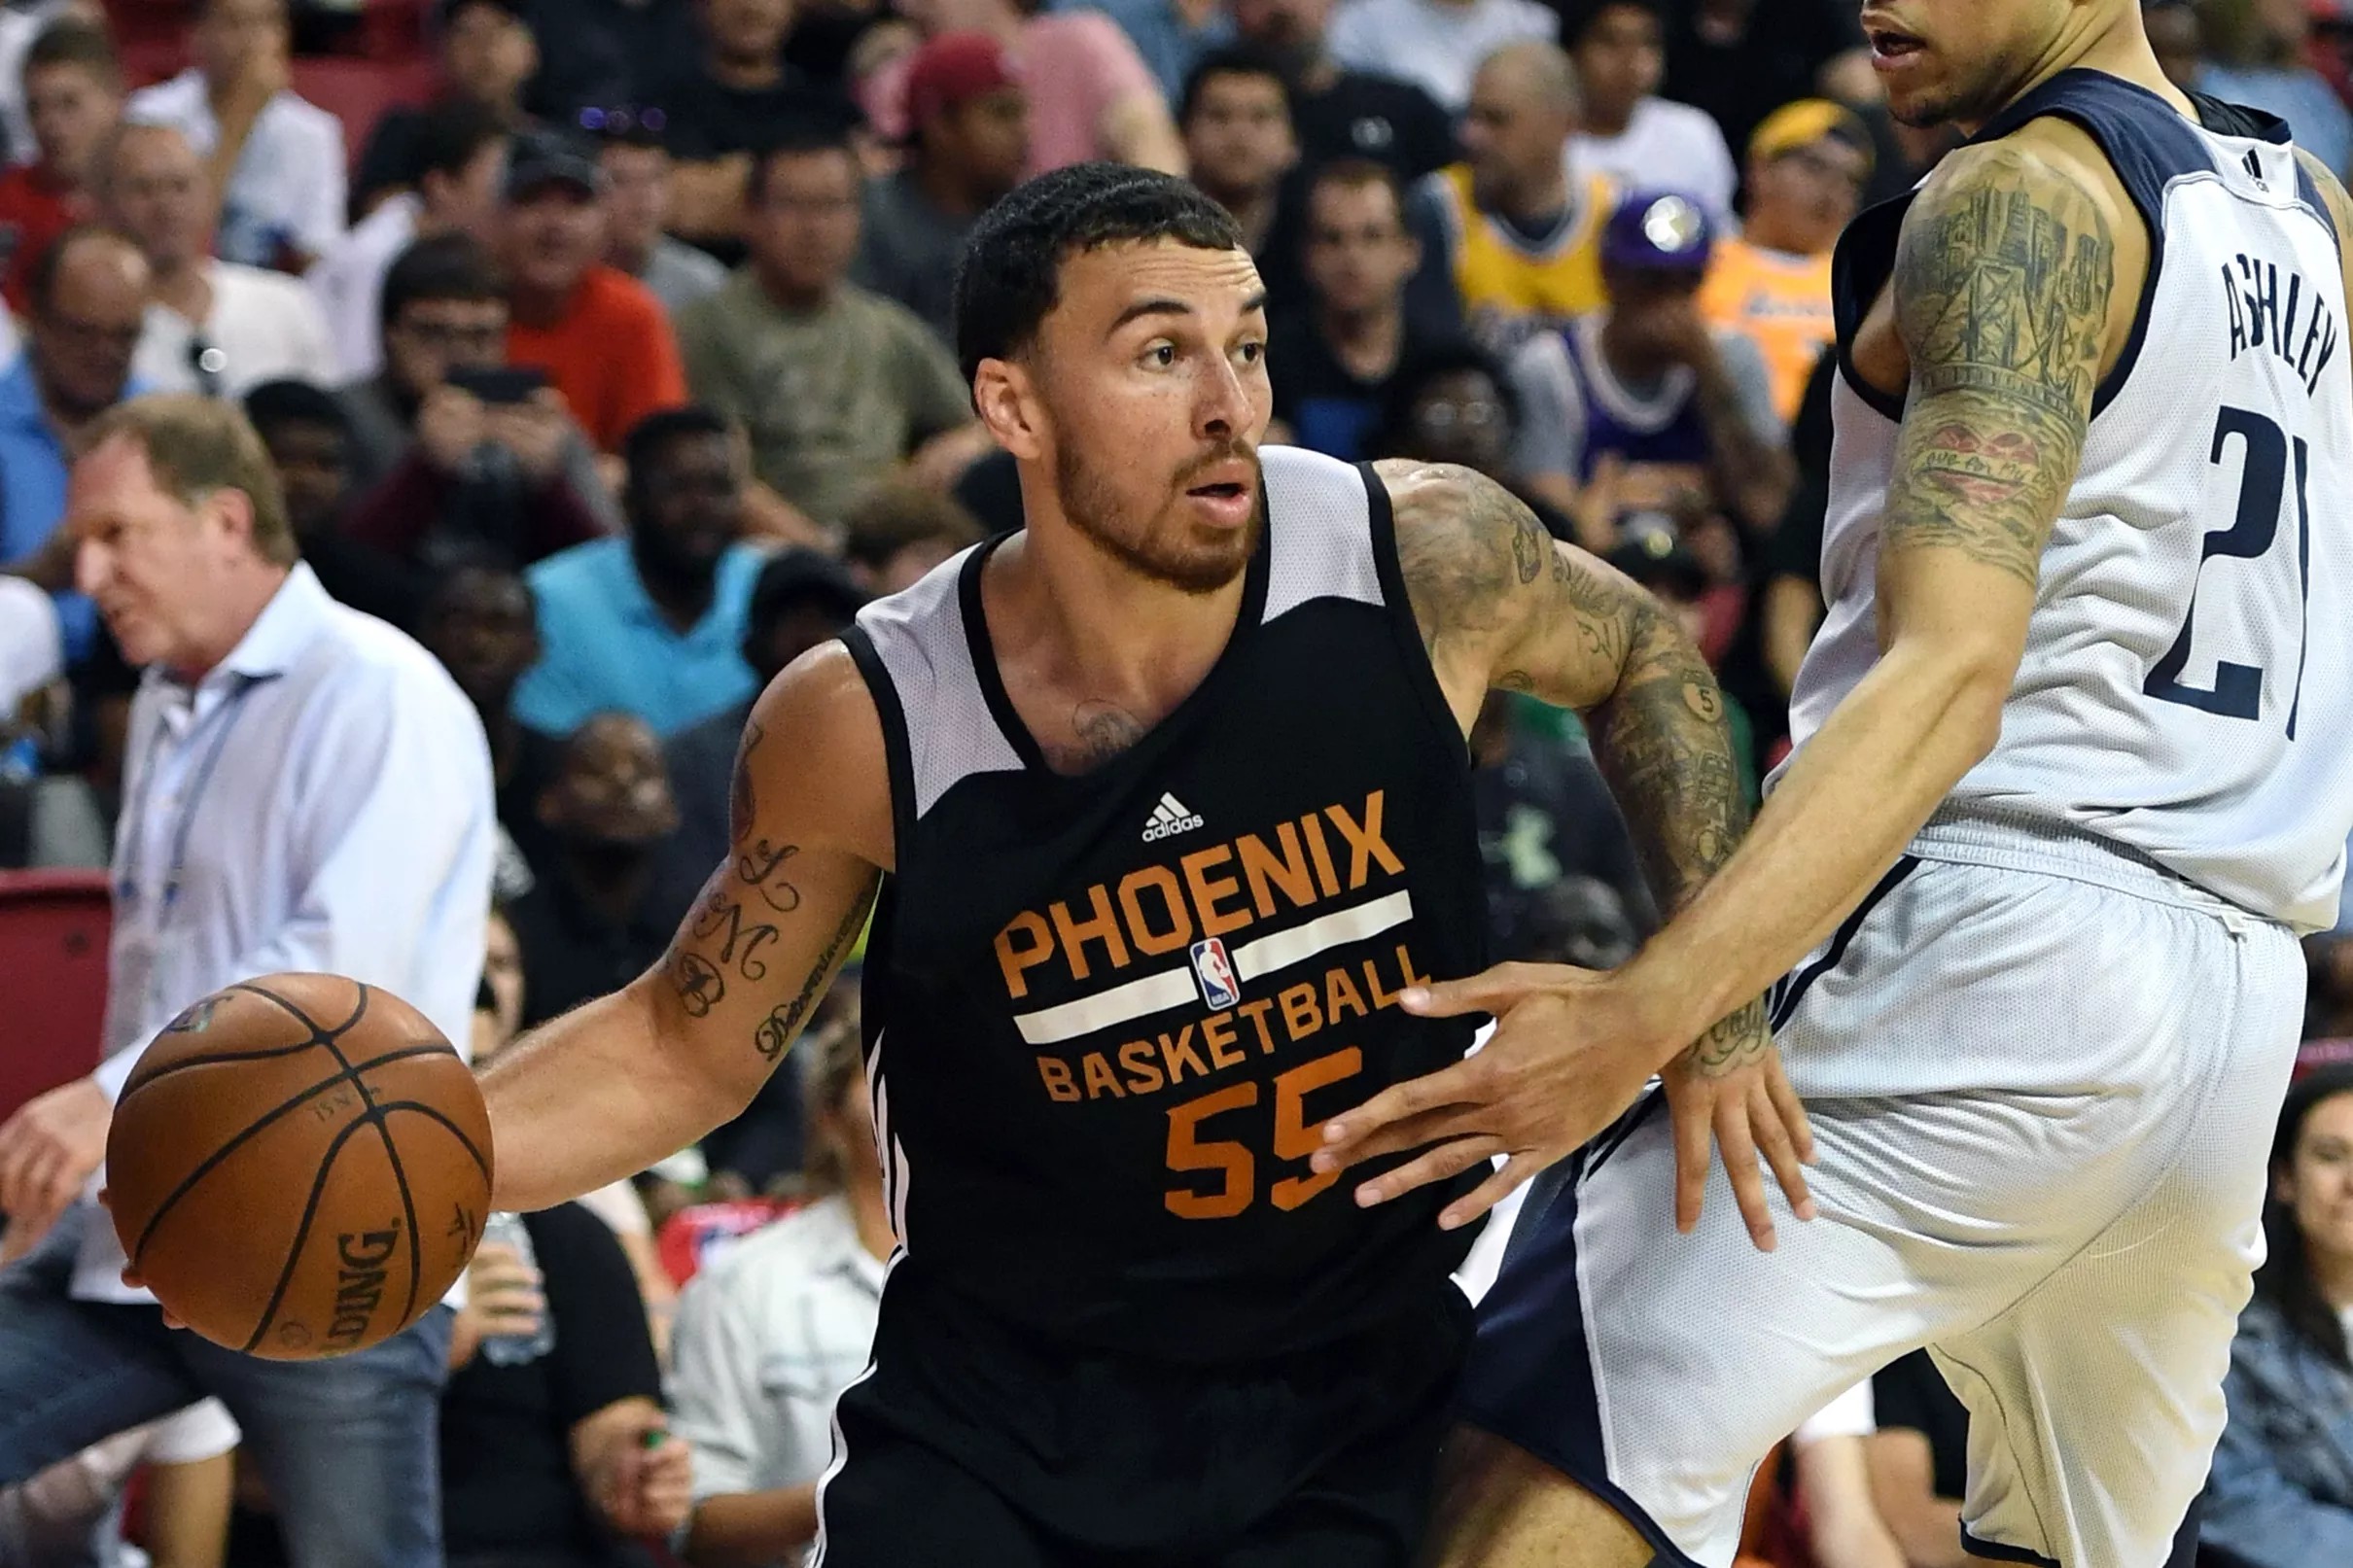 Don’t expect Mike James and Alec Peters to head straight to the G-League